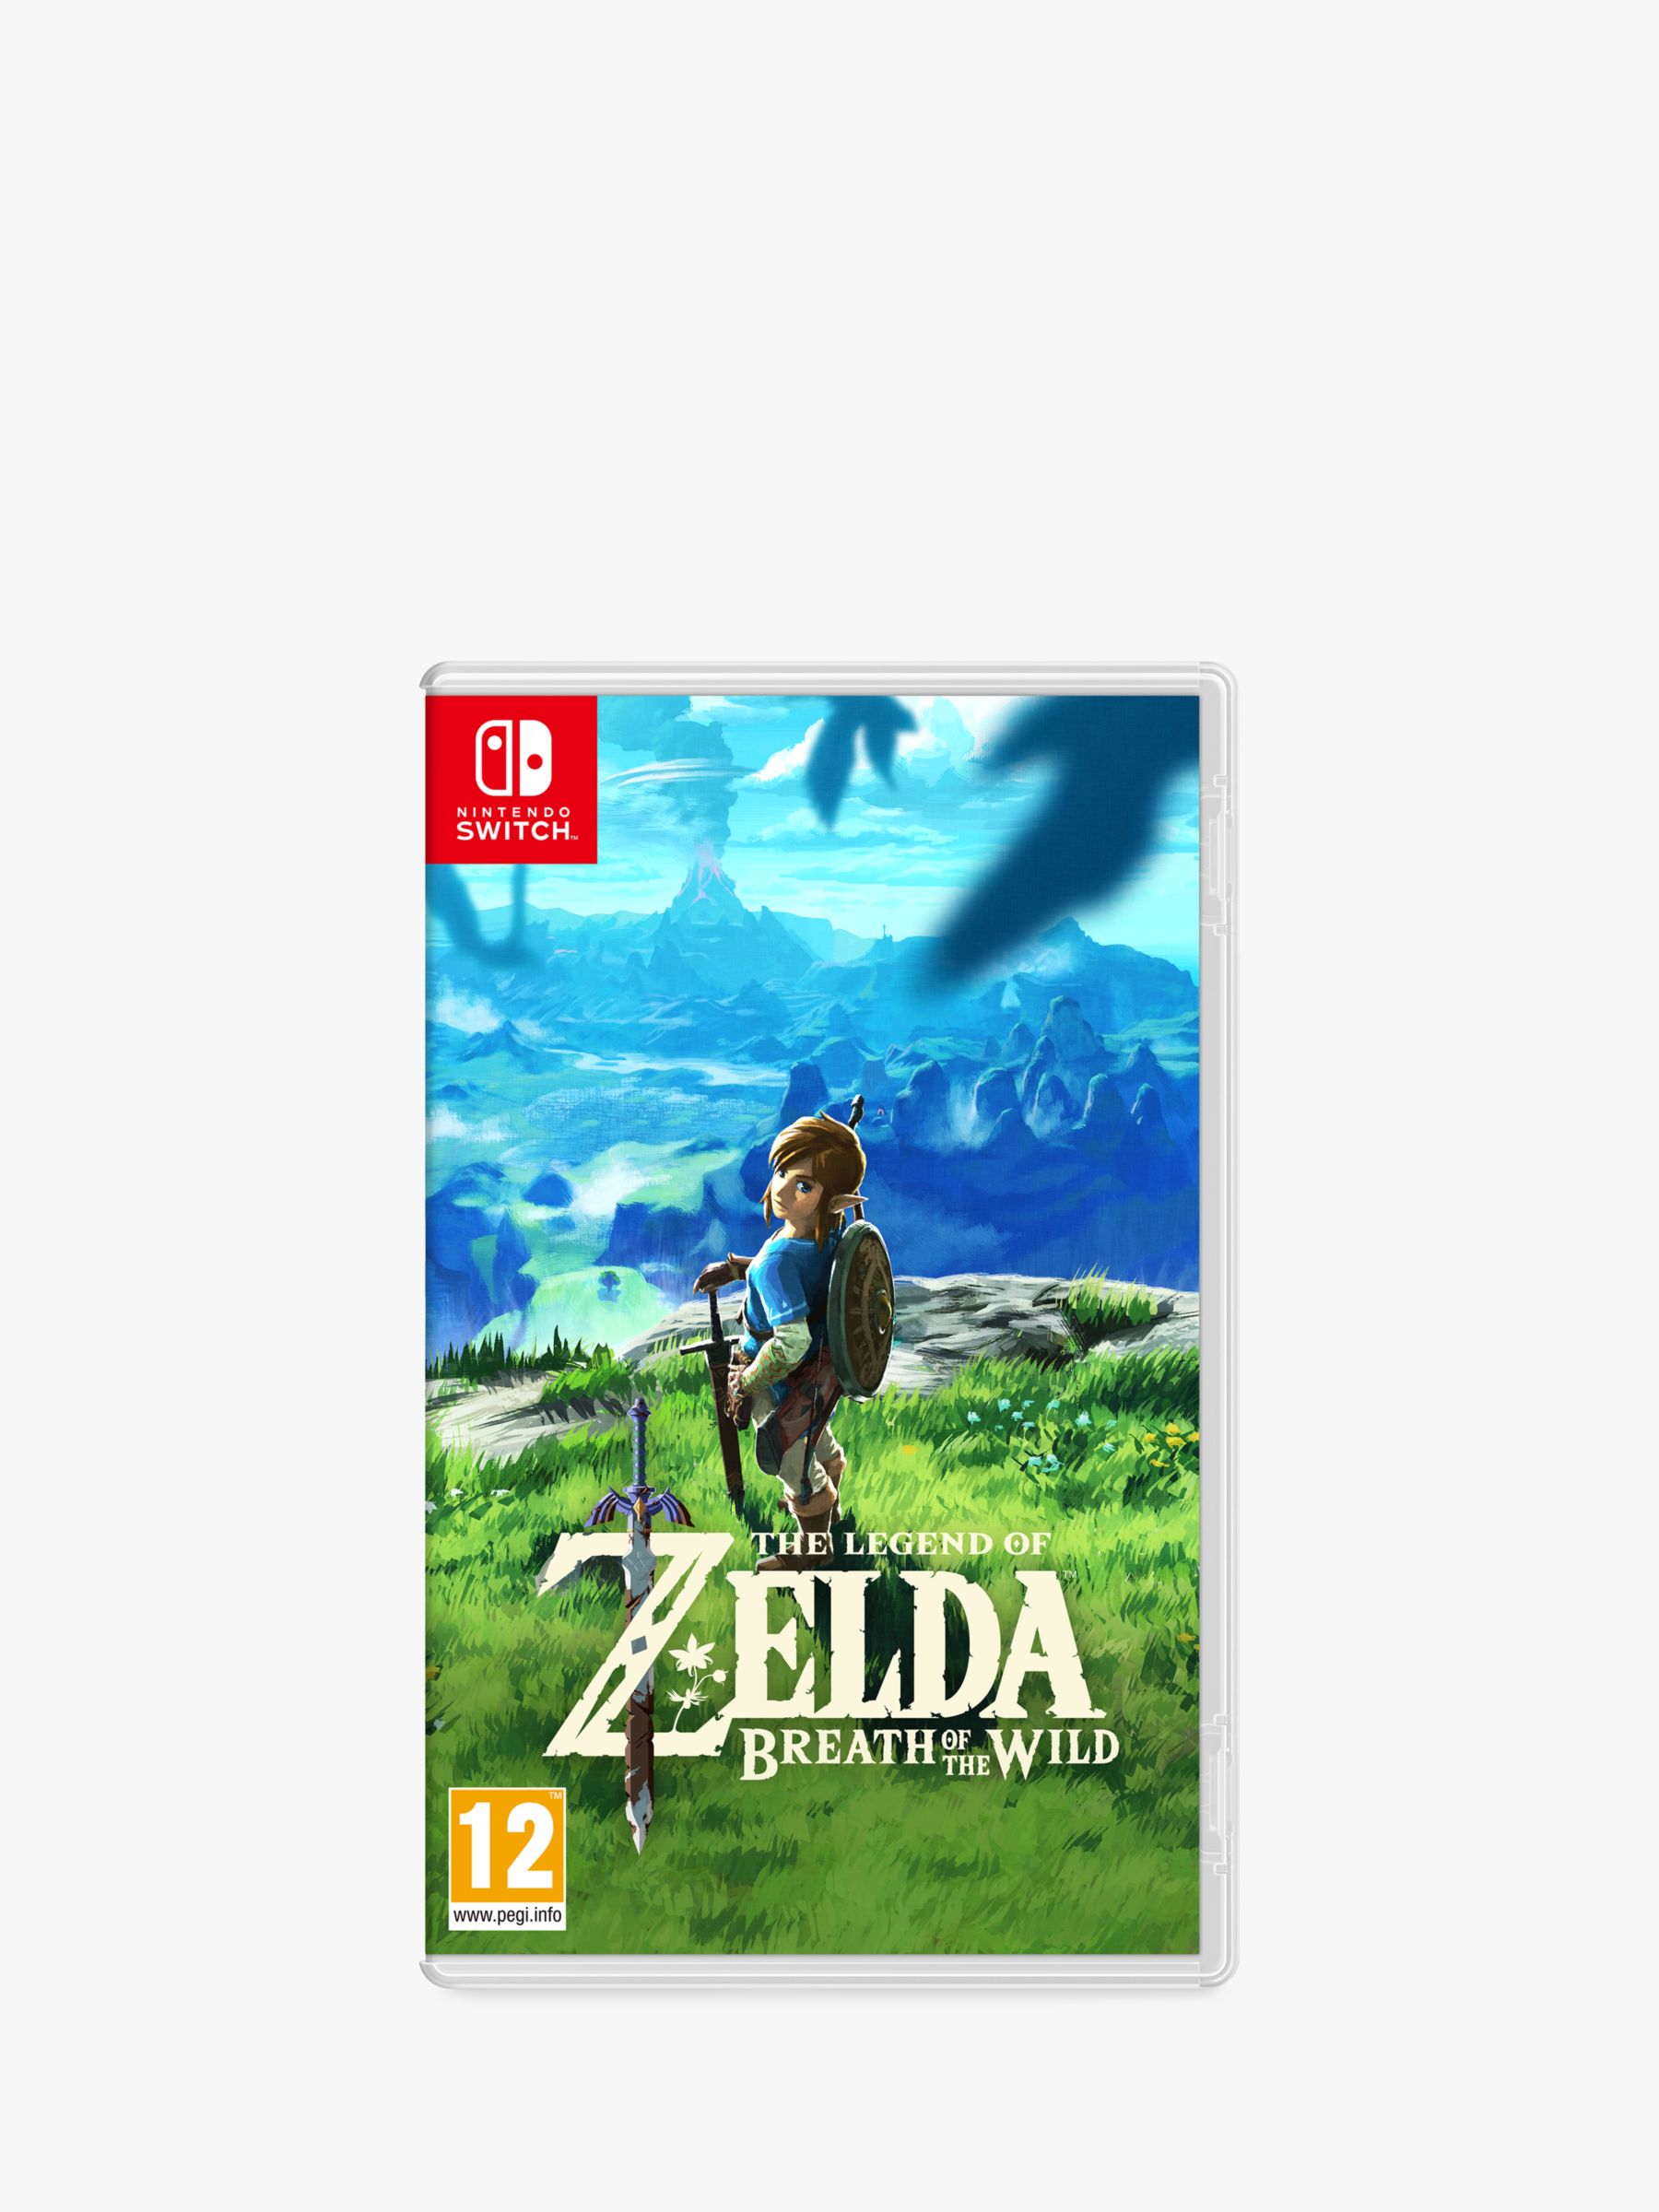 The Legend of Zelda: Breath of the Wild (for Nintendo Switch